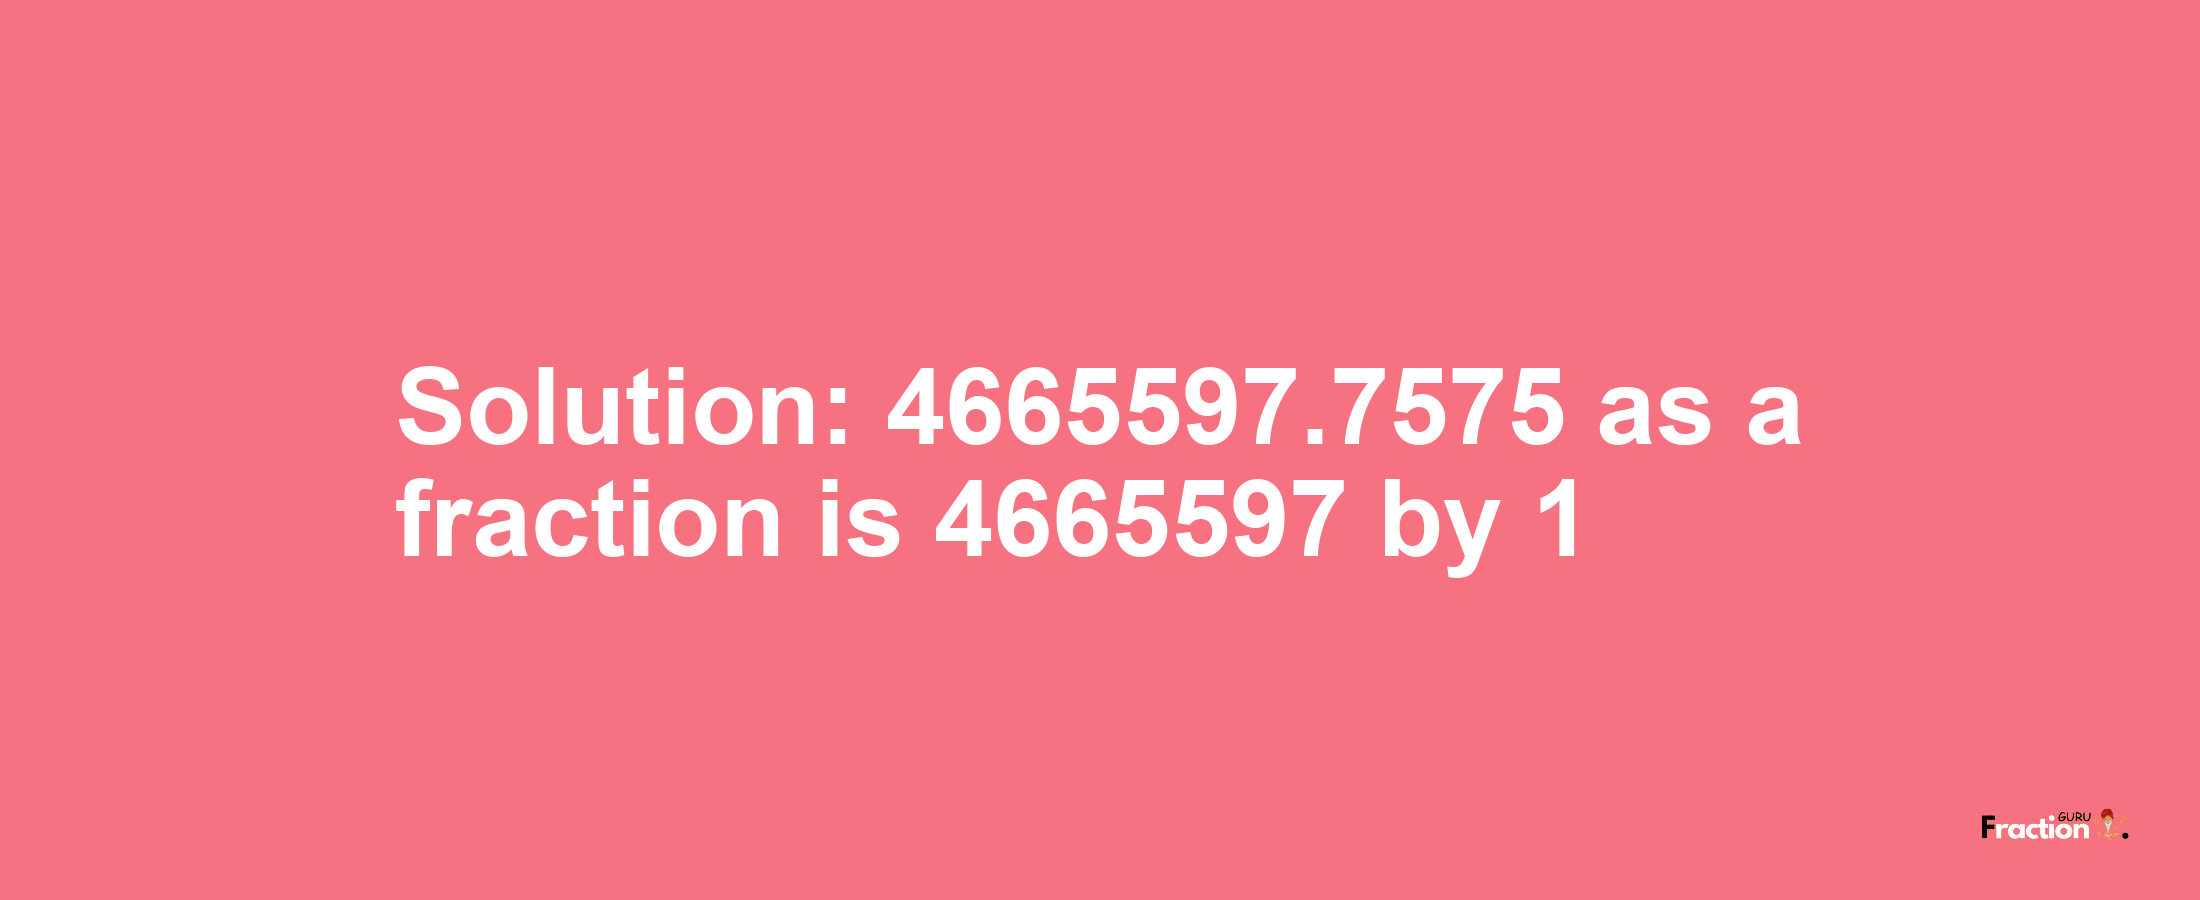 Solution:4665597.7575 as a fraction is 4665597/1